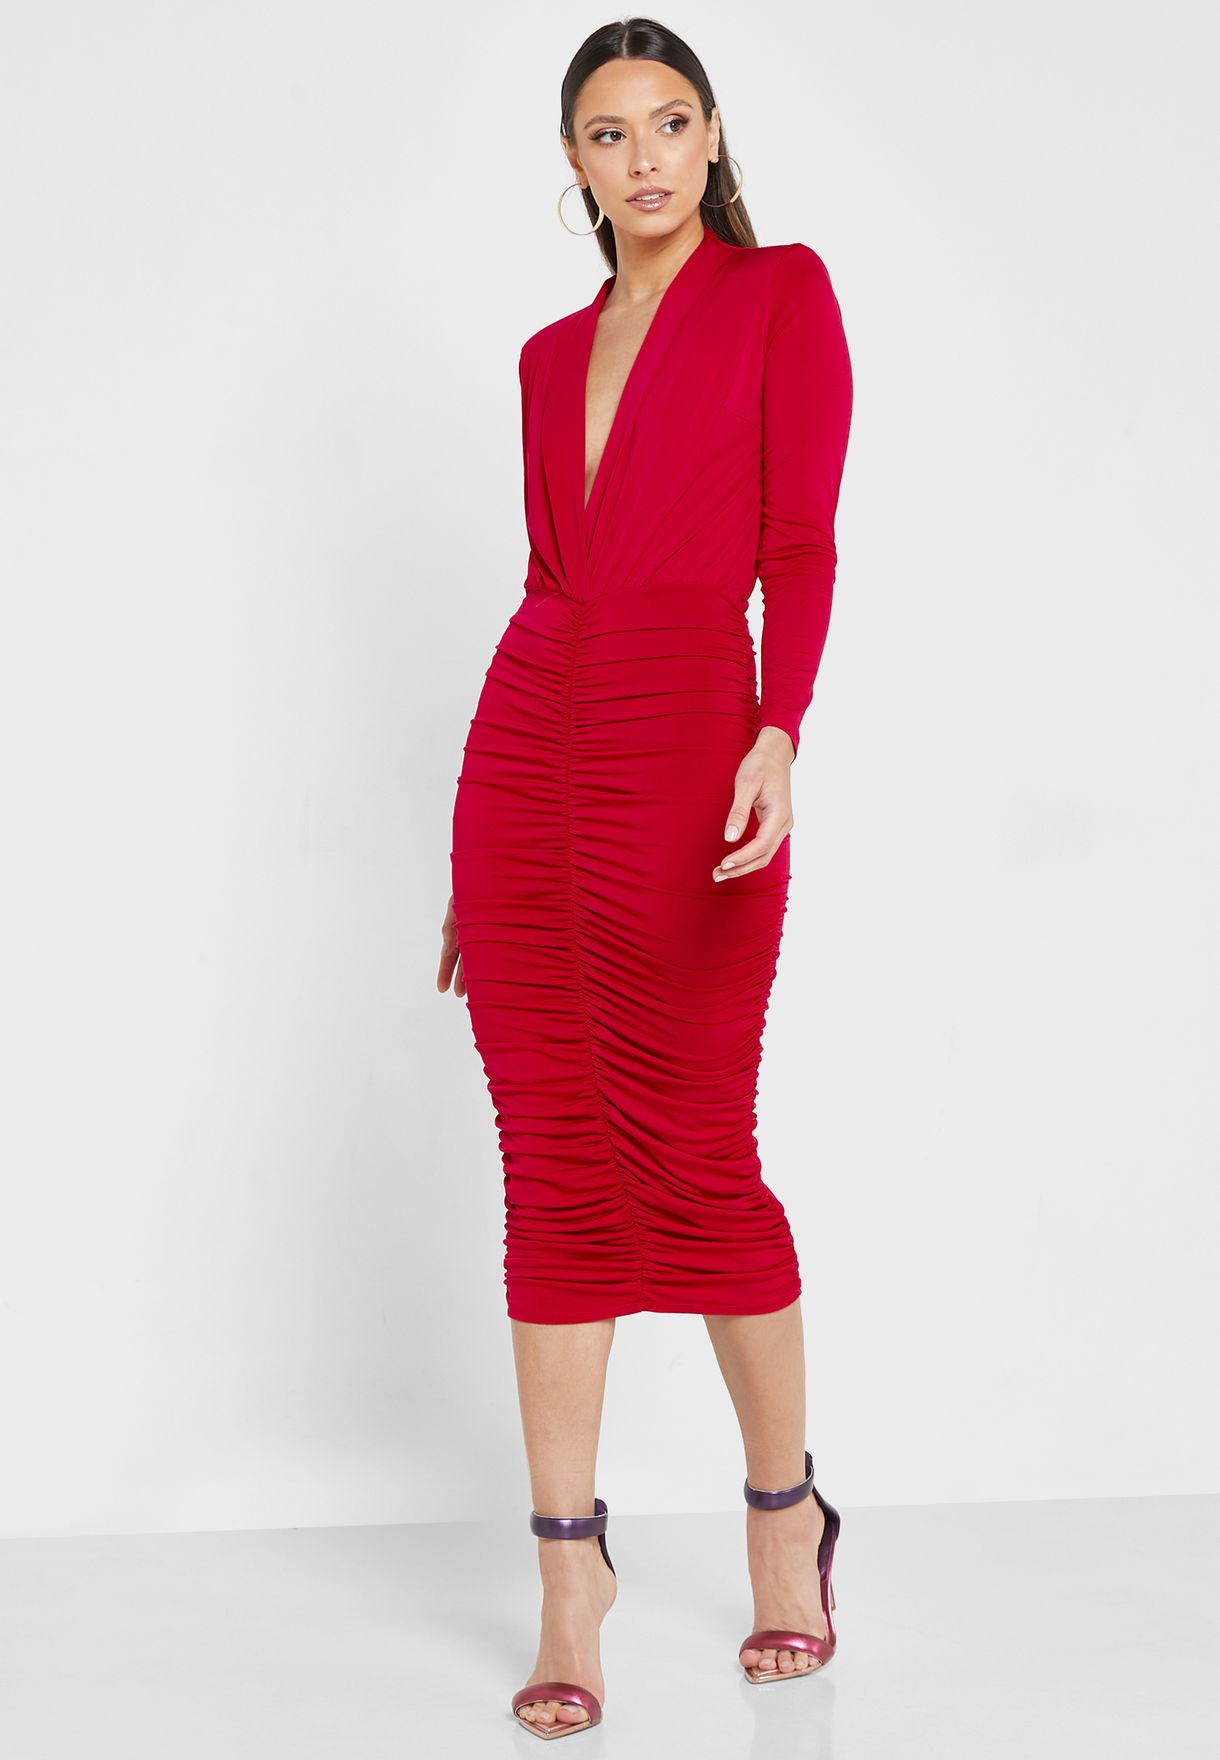 Ruched Bodycon Dress